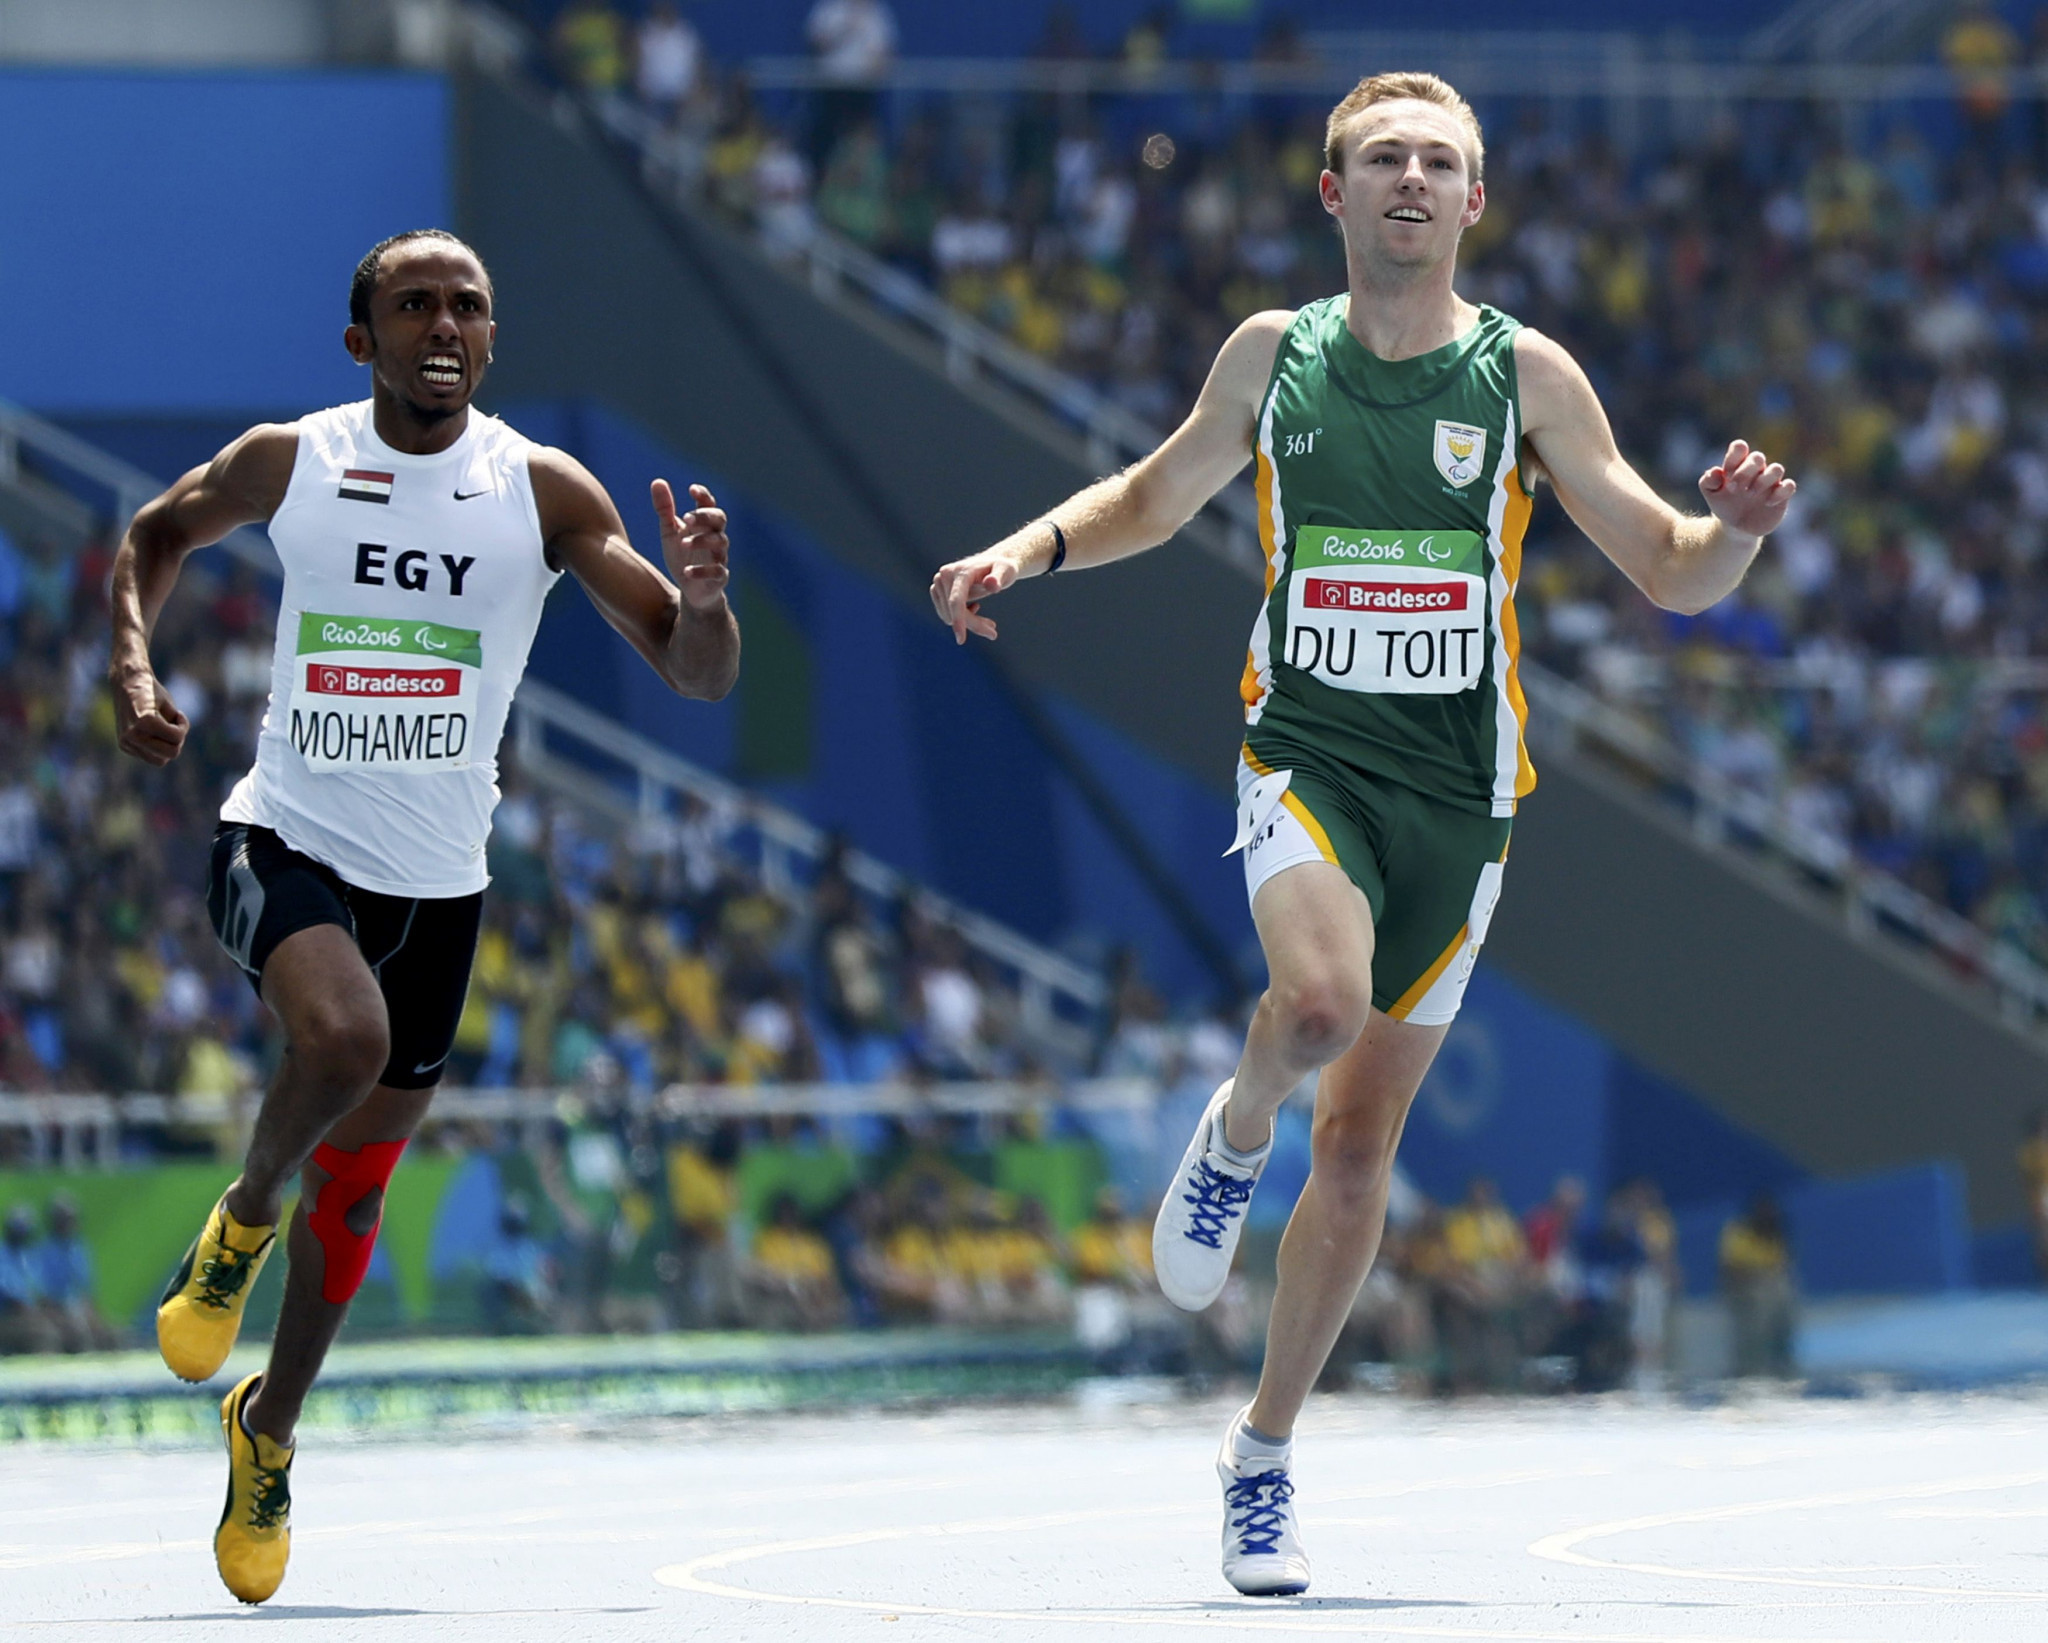 Charl du Toit was South Africa's most successful athlete at the 2016 Paralympic Games in Rio de Janeiro, winning the 100m and 400m T37, as the country won seven gold medals overall ©Getty Images